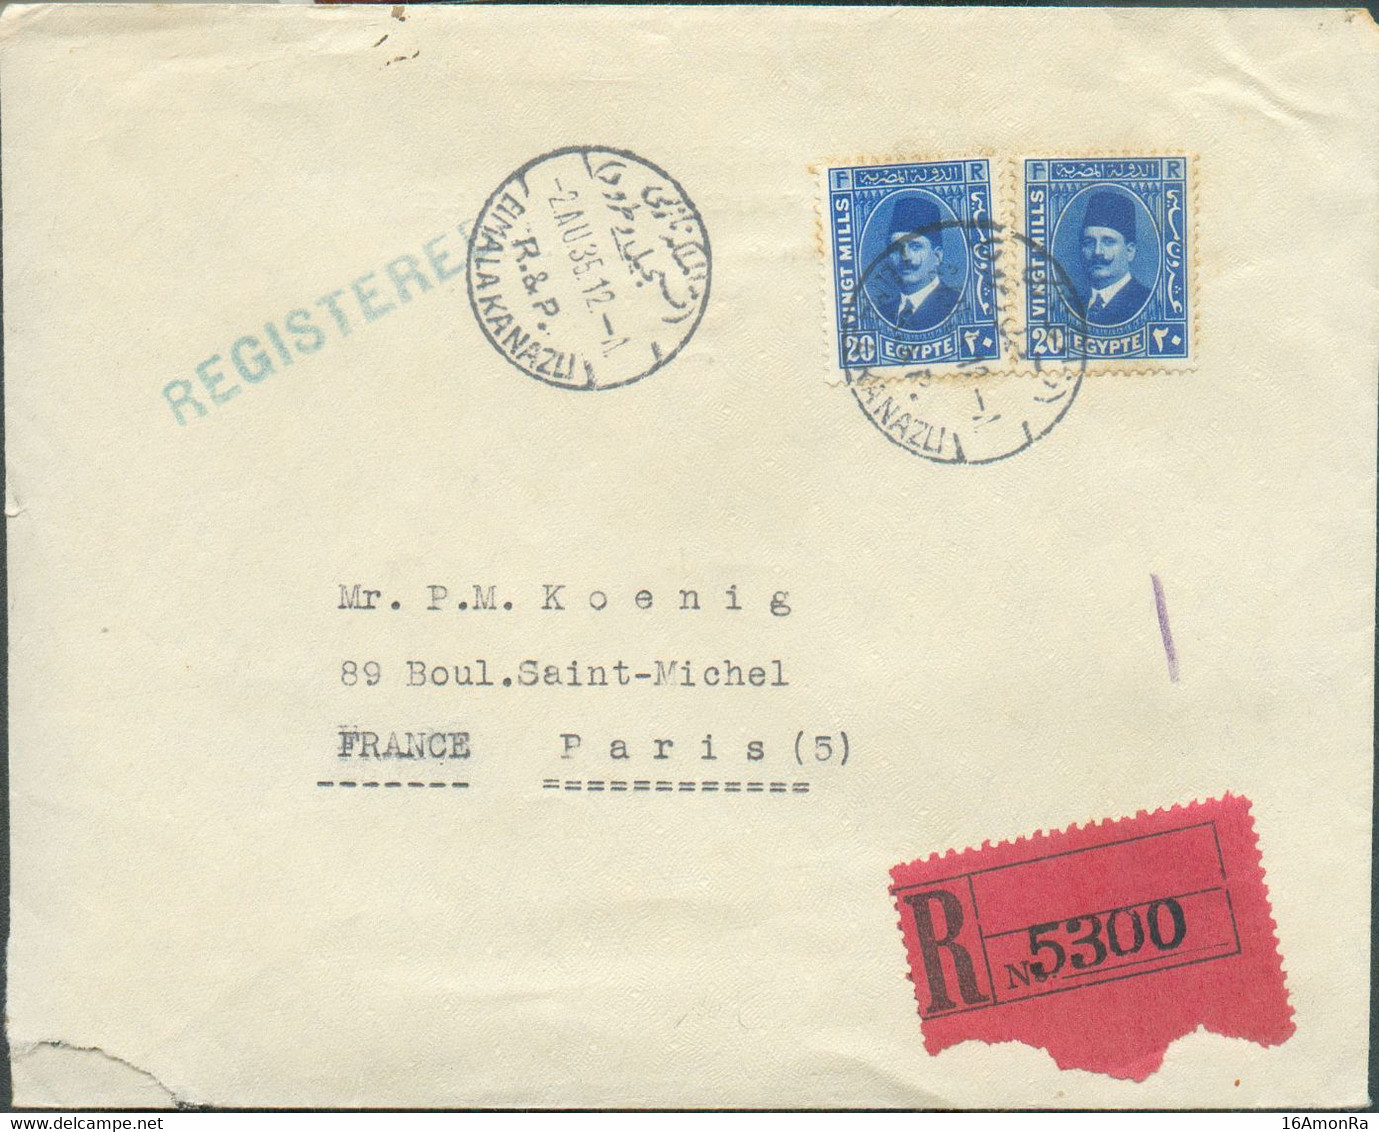 KING FOUAD 20p X2 Cancelled EL MALAKA NAZU (CAIRO) On Registered (label) Cover  2. AUG. 1935 To Paris - 19474 - Lettres & Documents